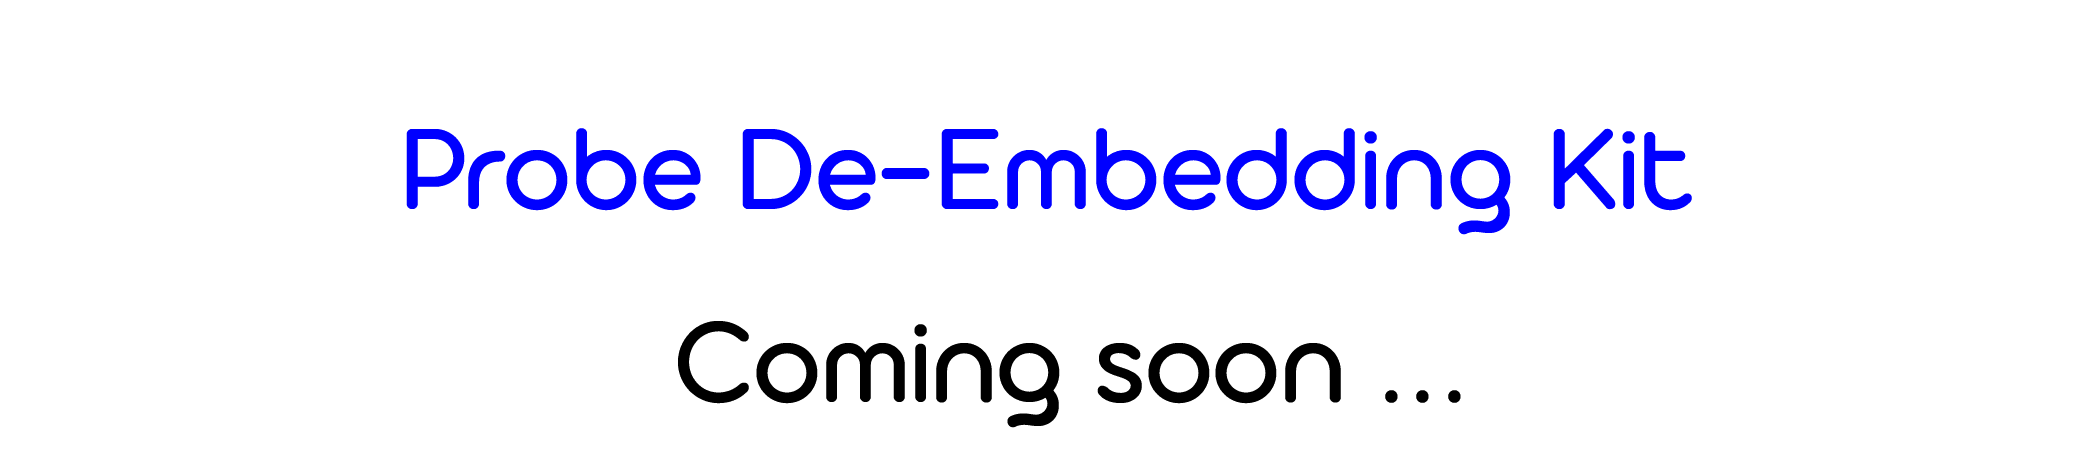 Shows image of the words "Probe De-embedding Kit" and "Coming Soon... ."